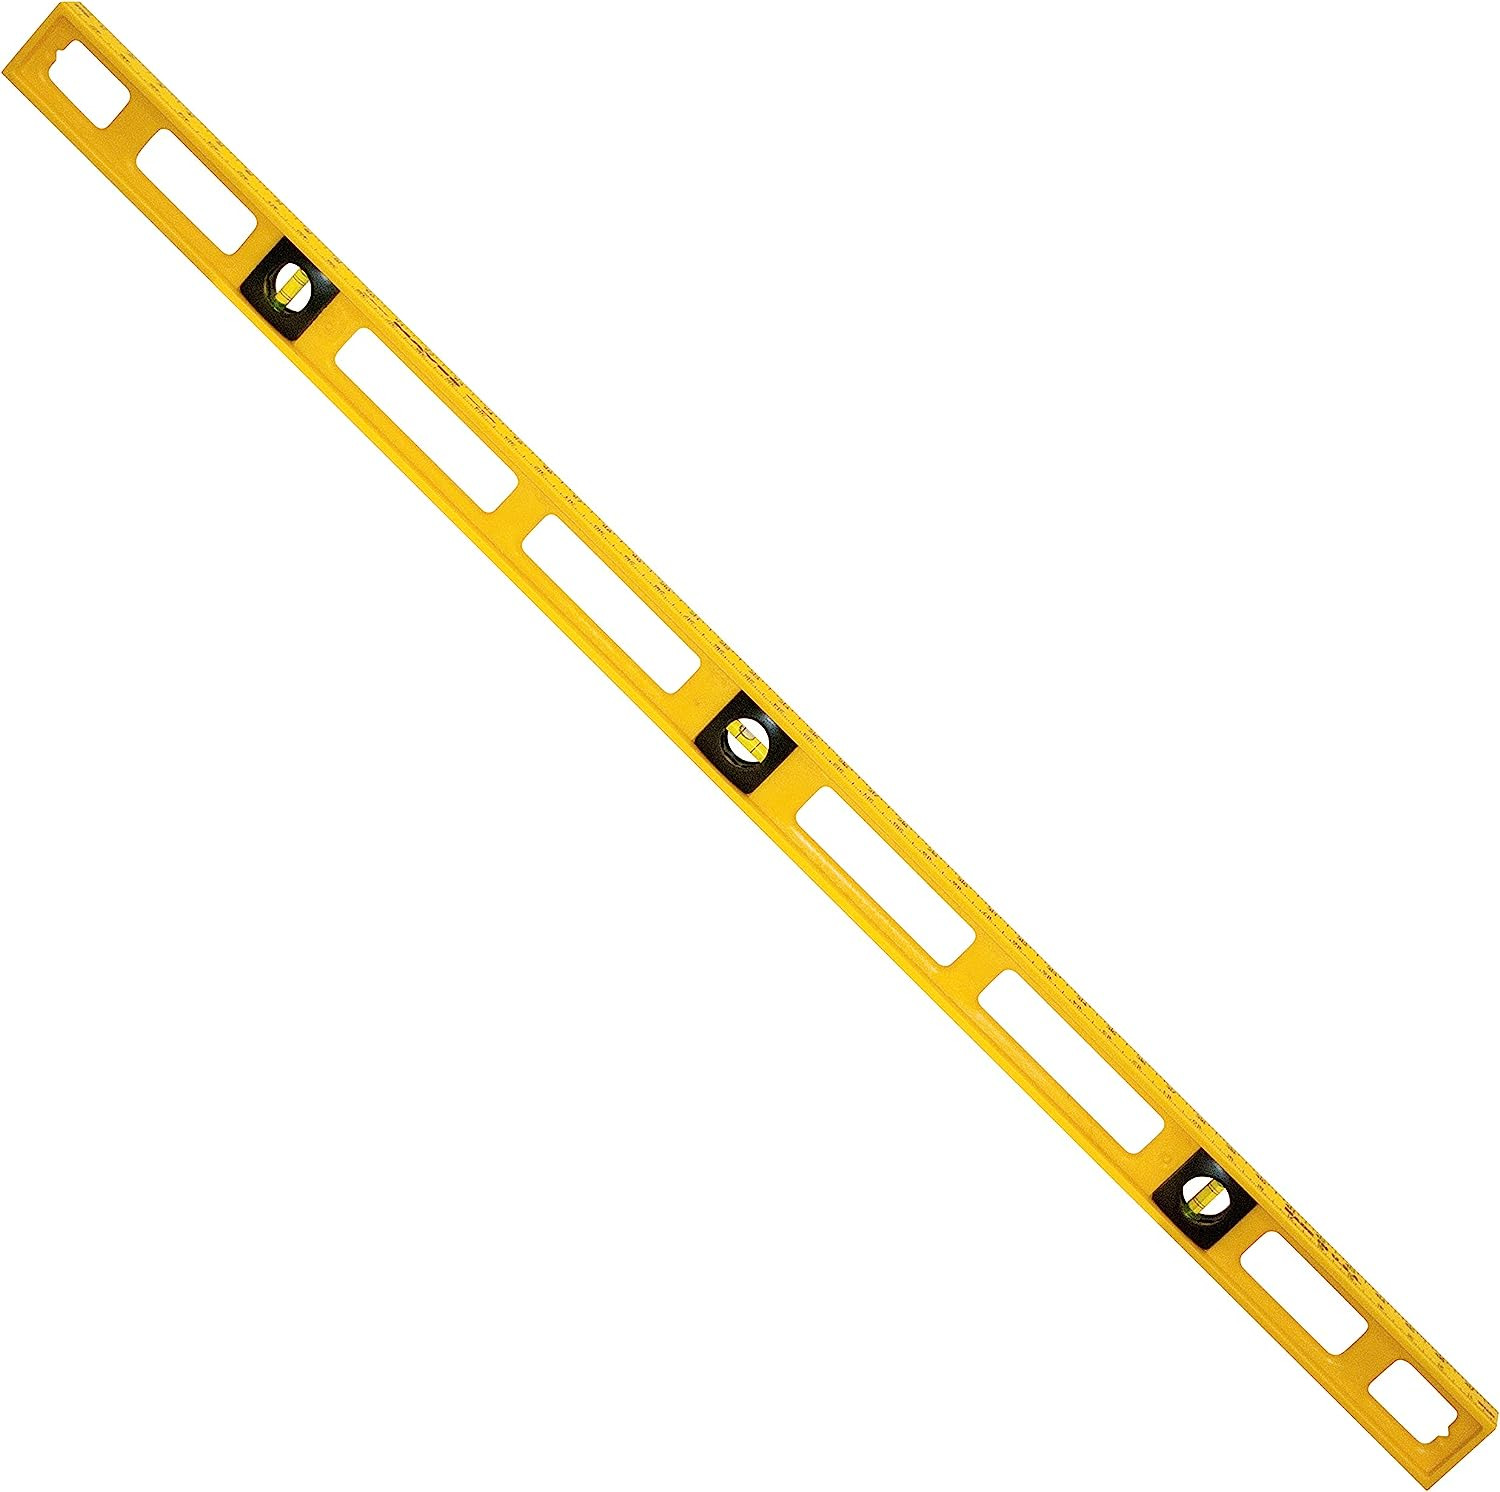 Mayes 10102 48 Inch Polystyrene Level | Carpenter, Contractor, and Plumber Tool 